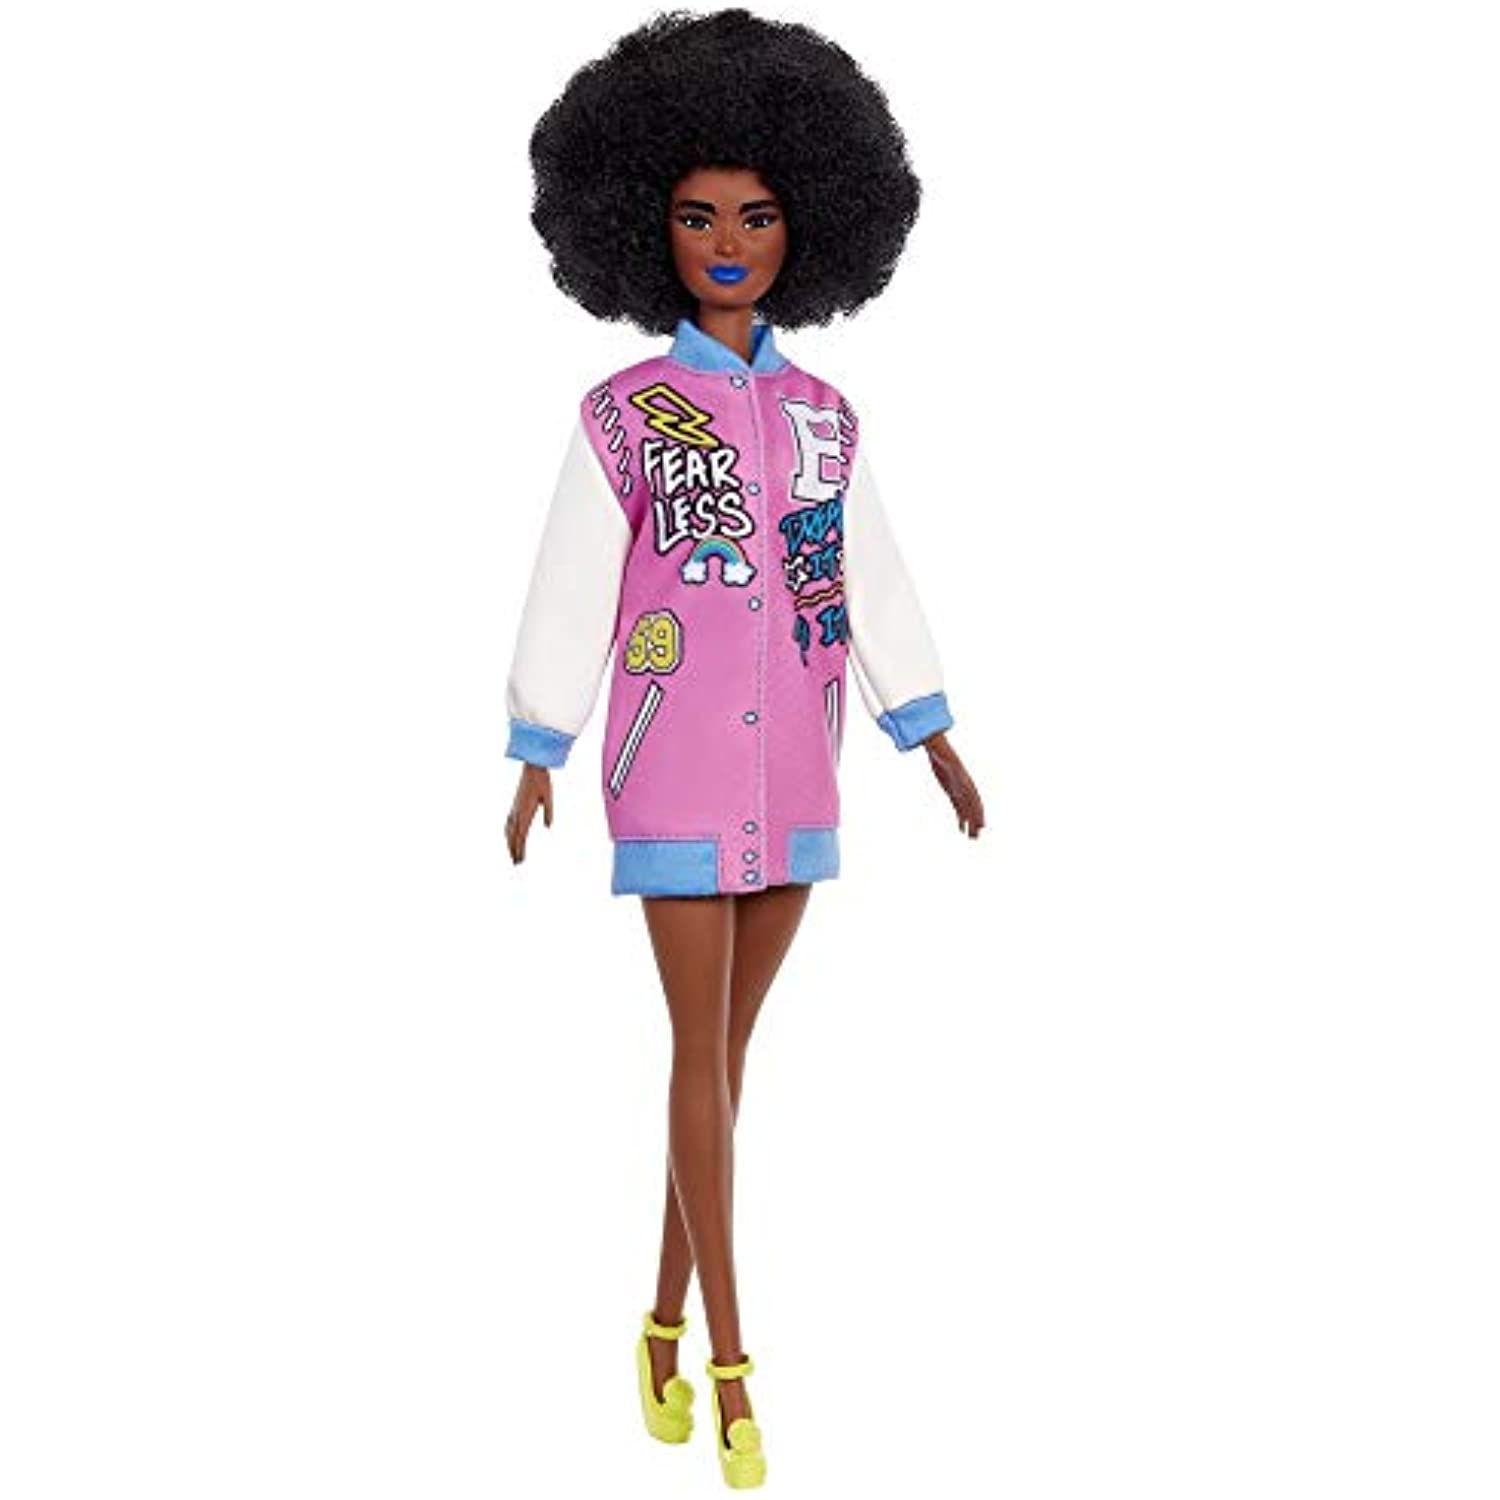 Barbie Fashionistas Doll #156 with Curly Brunette Hair and Letterman Jacket, Toy for Kids 3 to 8 Years Old